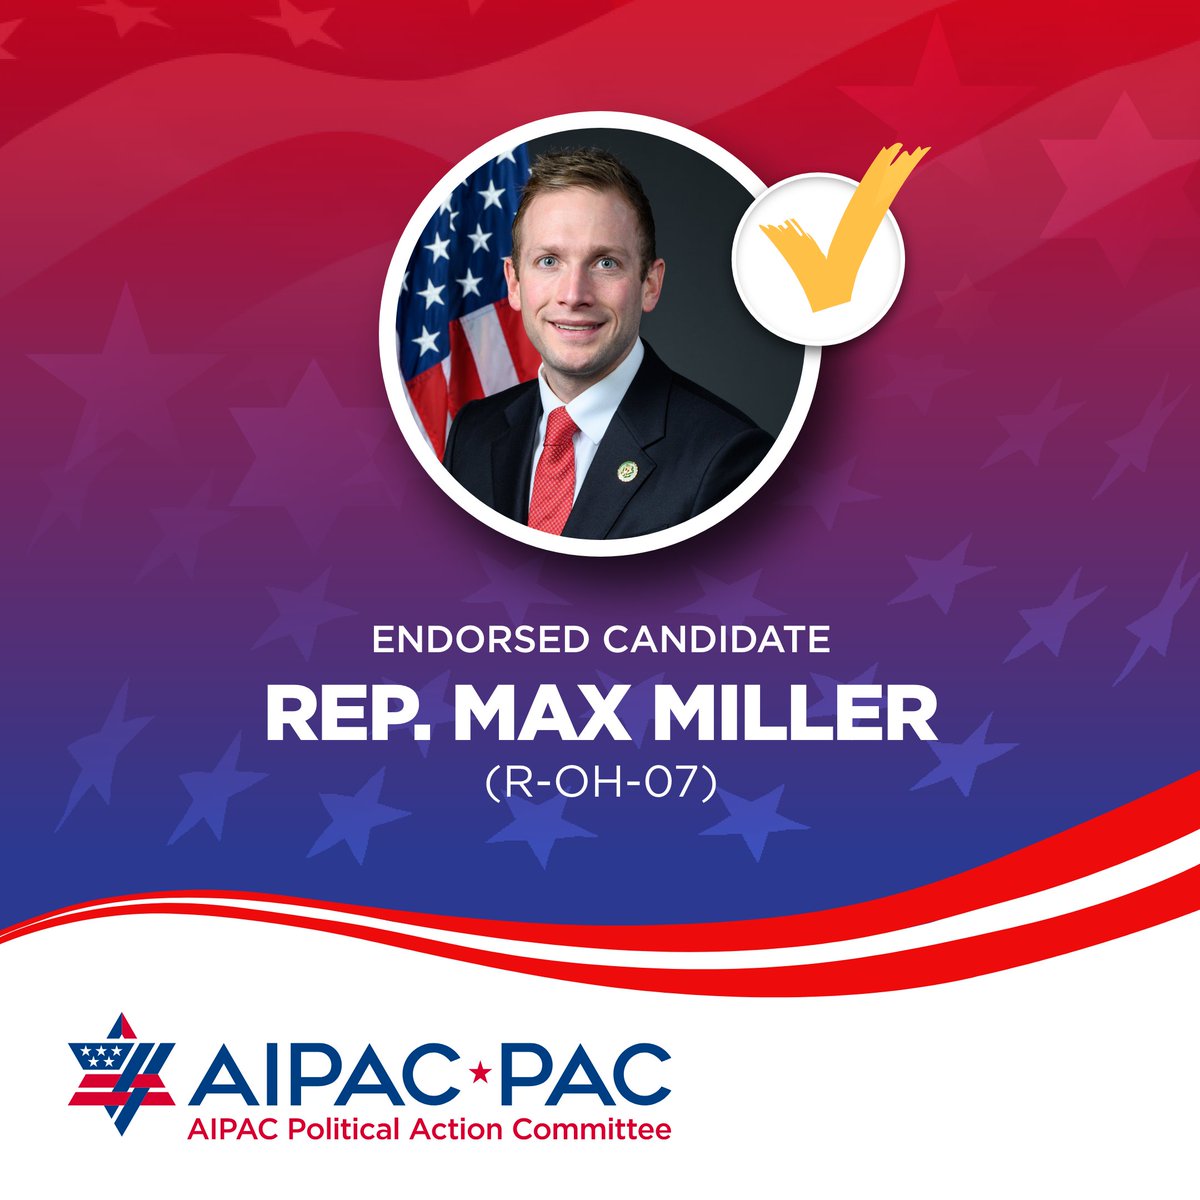 Congratulations to AIPAC-endorsed @RepGregLandsman and @RepMaxMiller on your primary election victories! AIPAC is proud to stand with pro-Israel candidates who help strengthen and expand the U.S.-Israel relationship. Being pro-Israel is good policy and good politics.